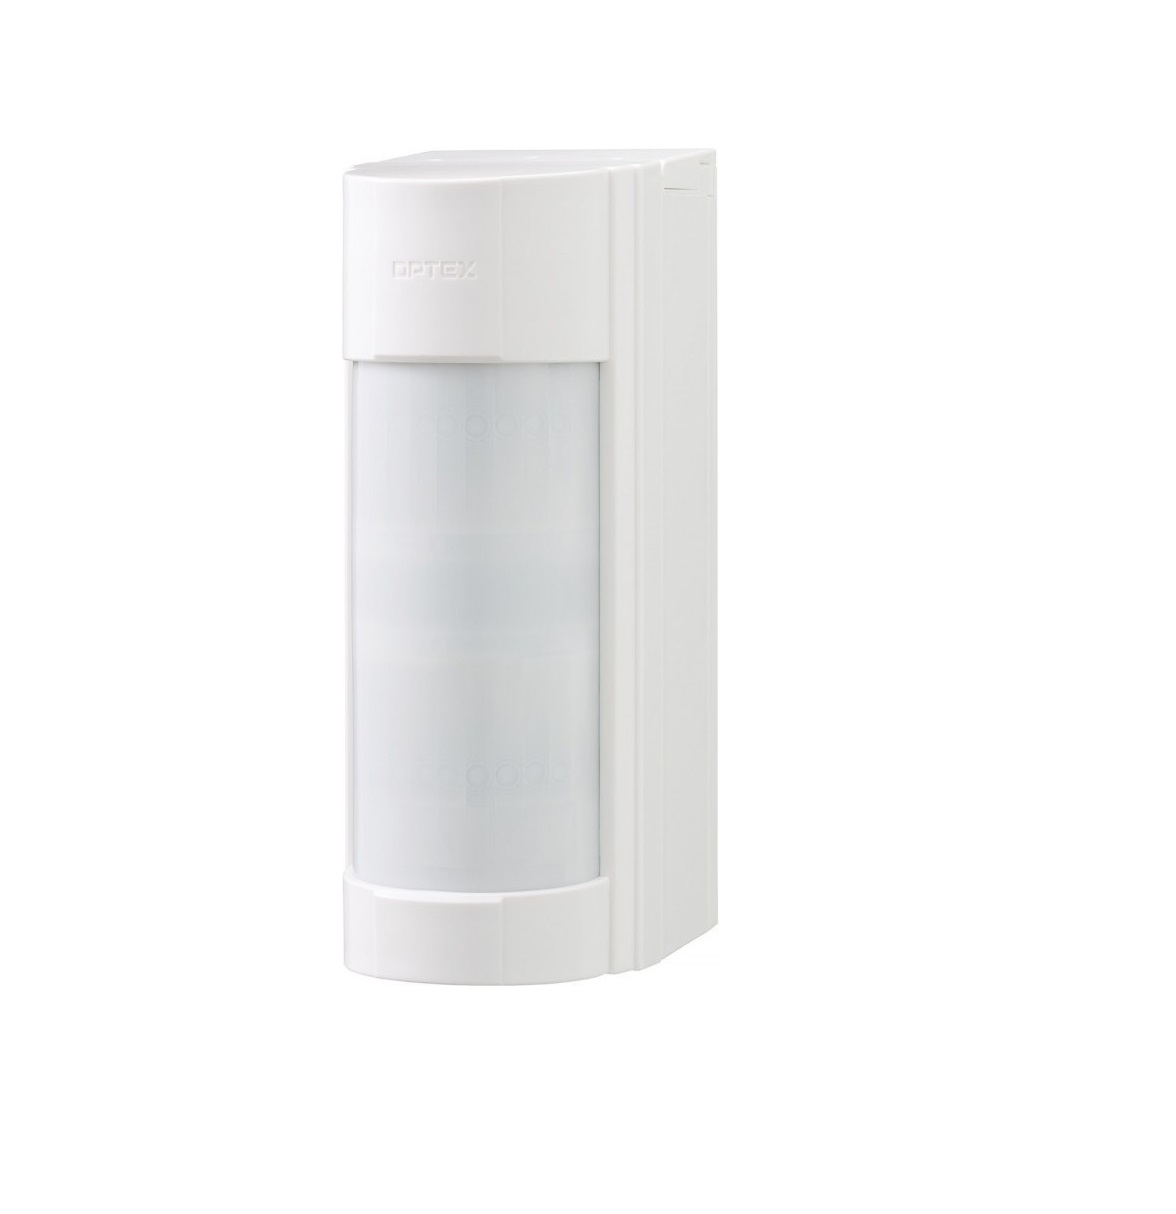 OPTEX VXI-R Wireless Infrared Outdoor Motion Detector